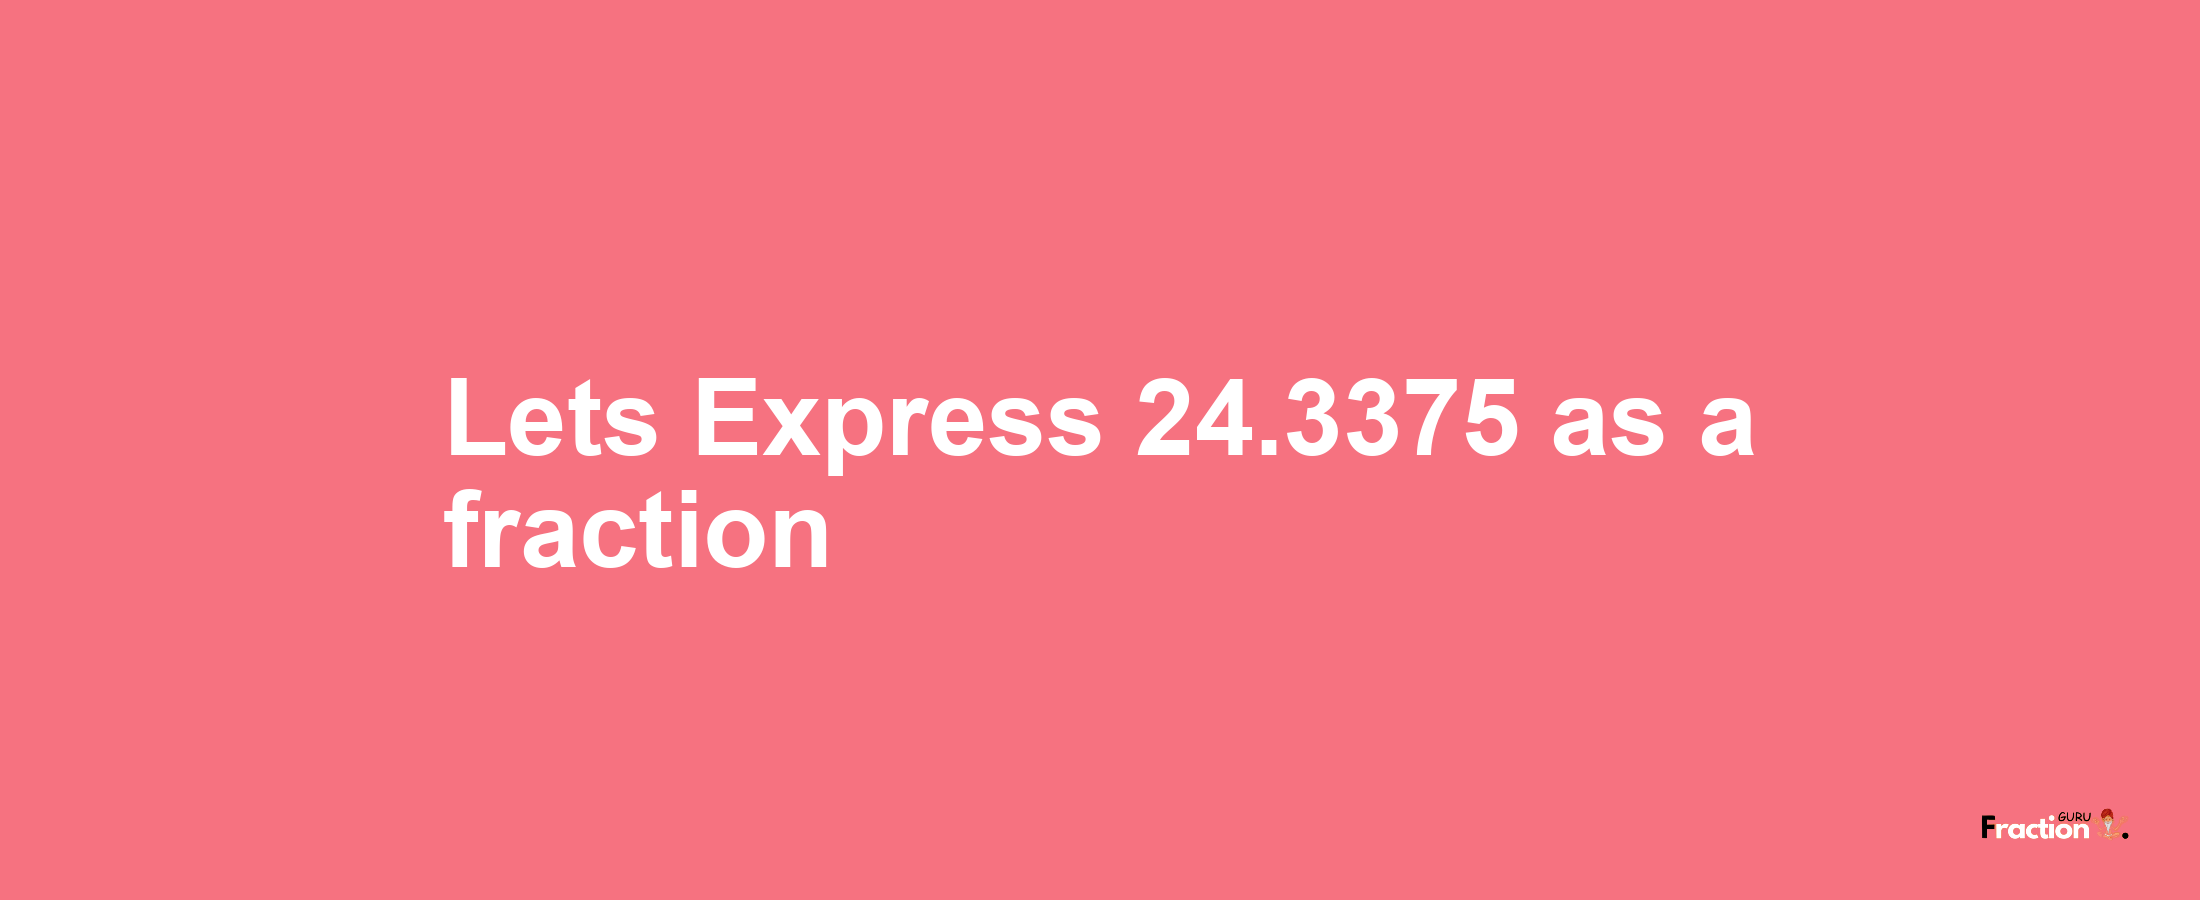 Lets Express 24.3375 as afraction